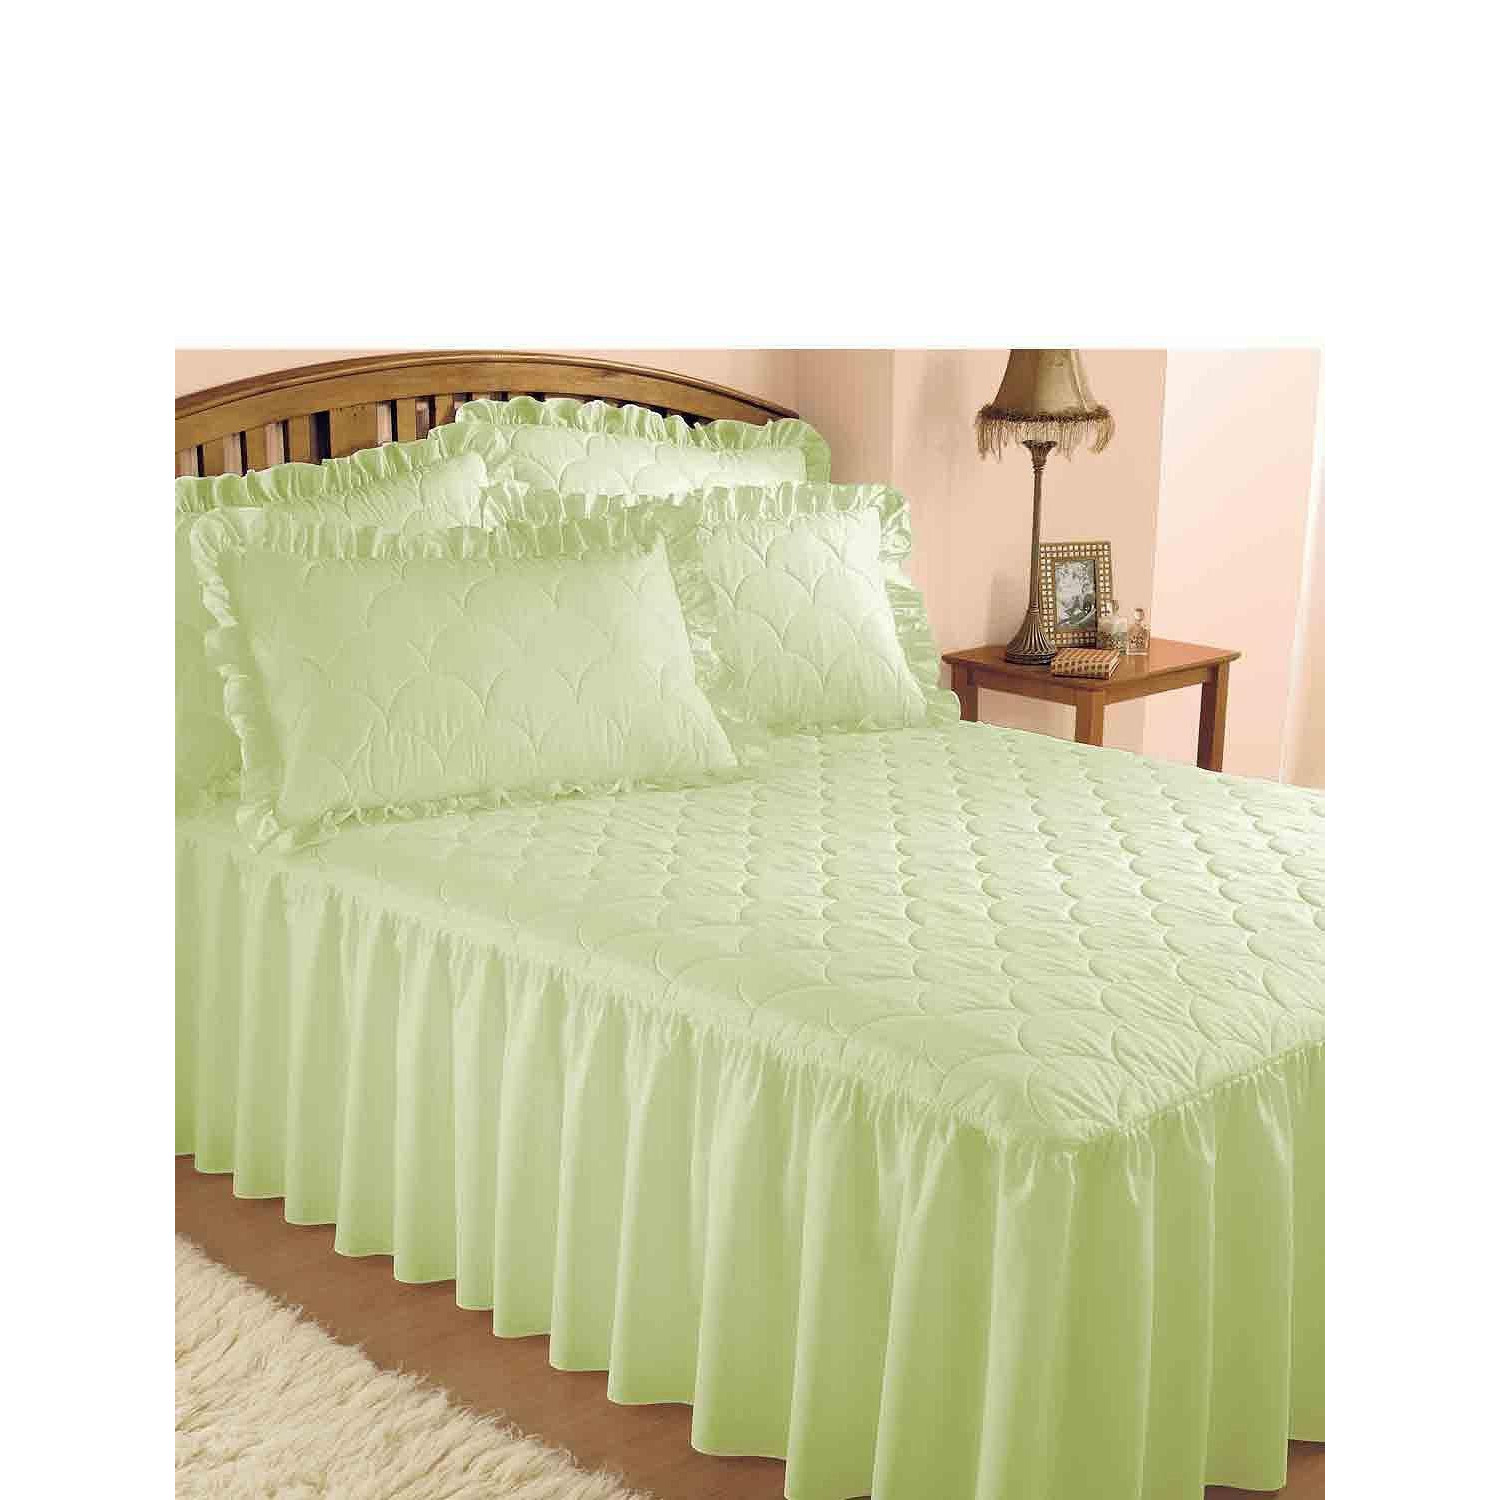 Plain Quilted Bedspread with Pillow Shams sold separately - image 1